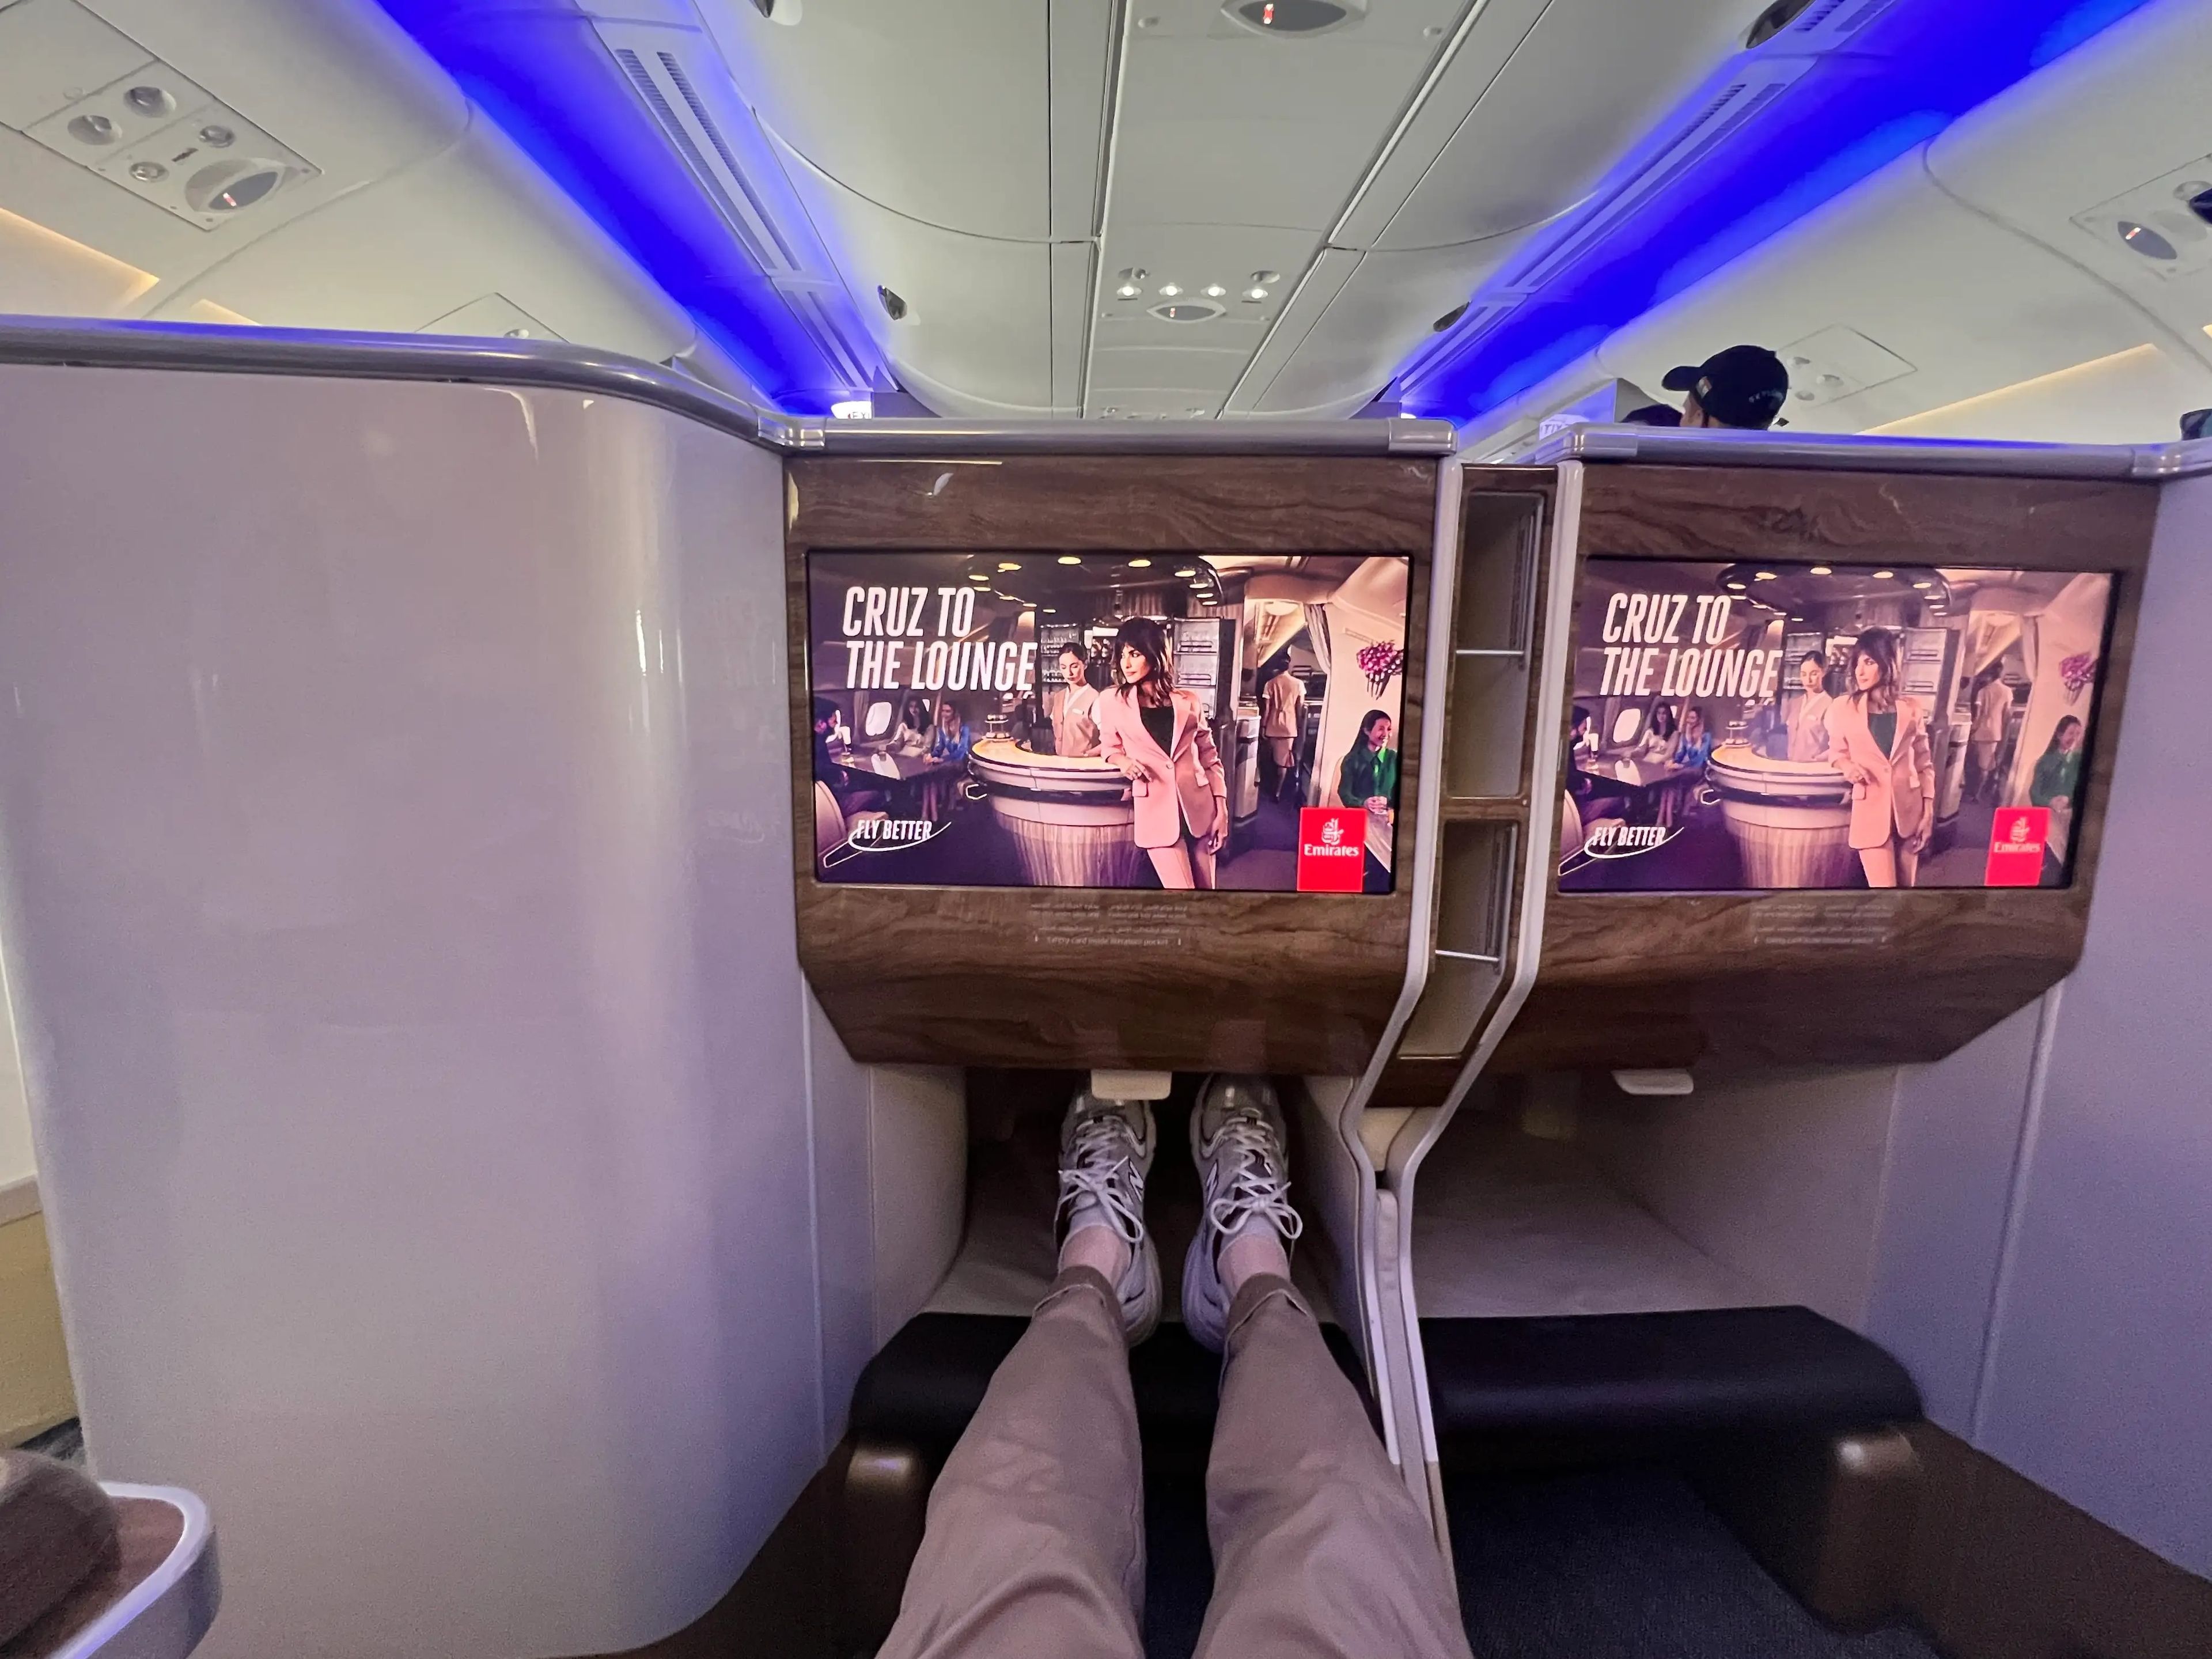 A passenger's point of view stretching out his legs and resting them on an ottoman in an Emirates business class seat, with a TV screen in front.